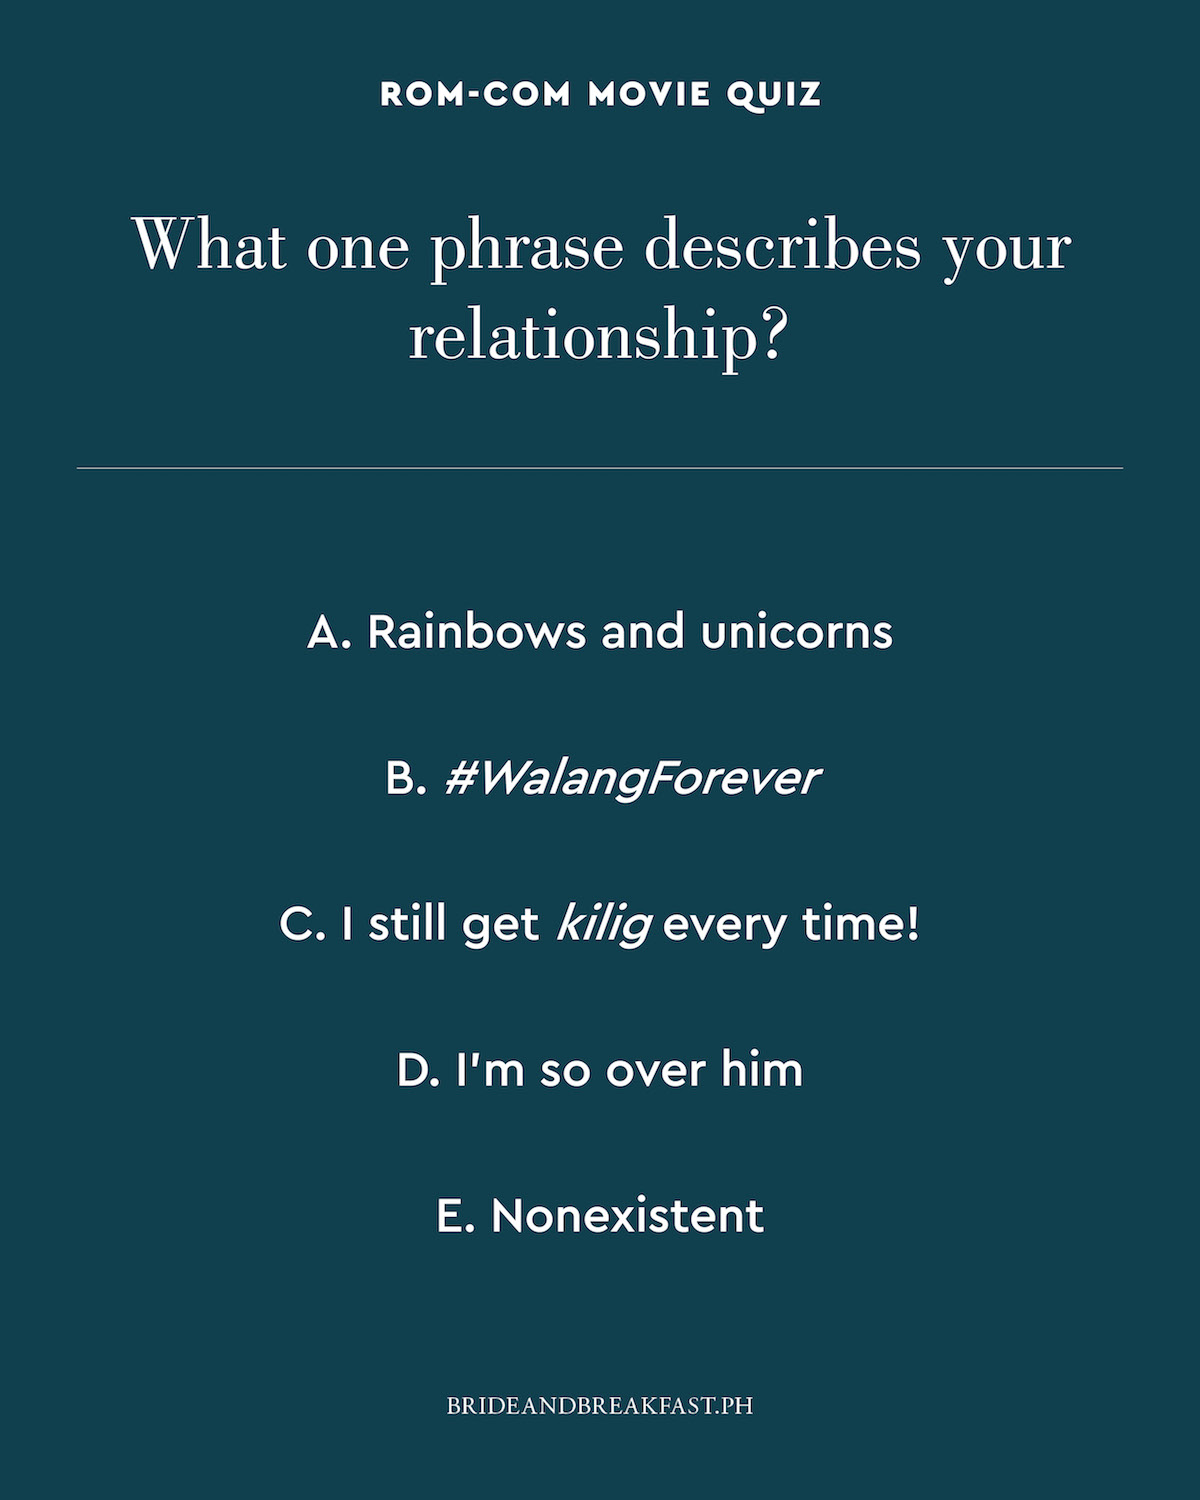 What one phrase describes your relationship? A. Rainbows and unicorns B. #WalangForever C. I still get kilig every time! D. I'm so over him E. Nonexistent